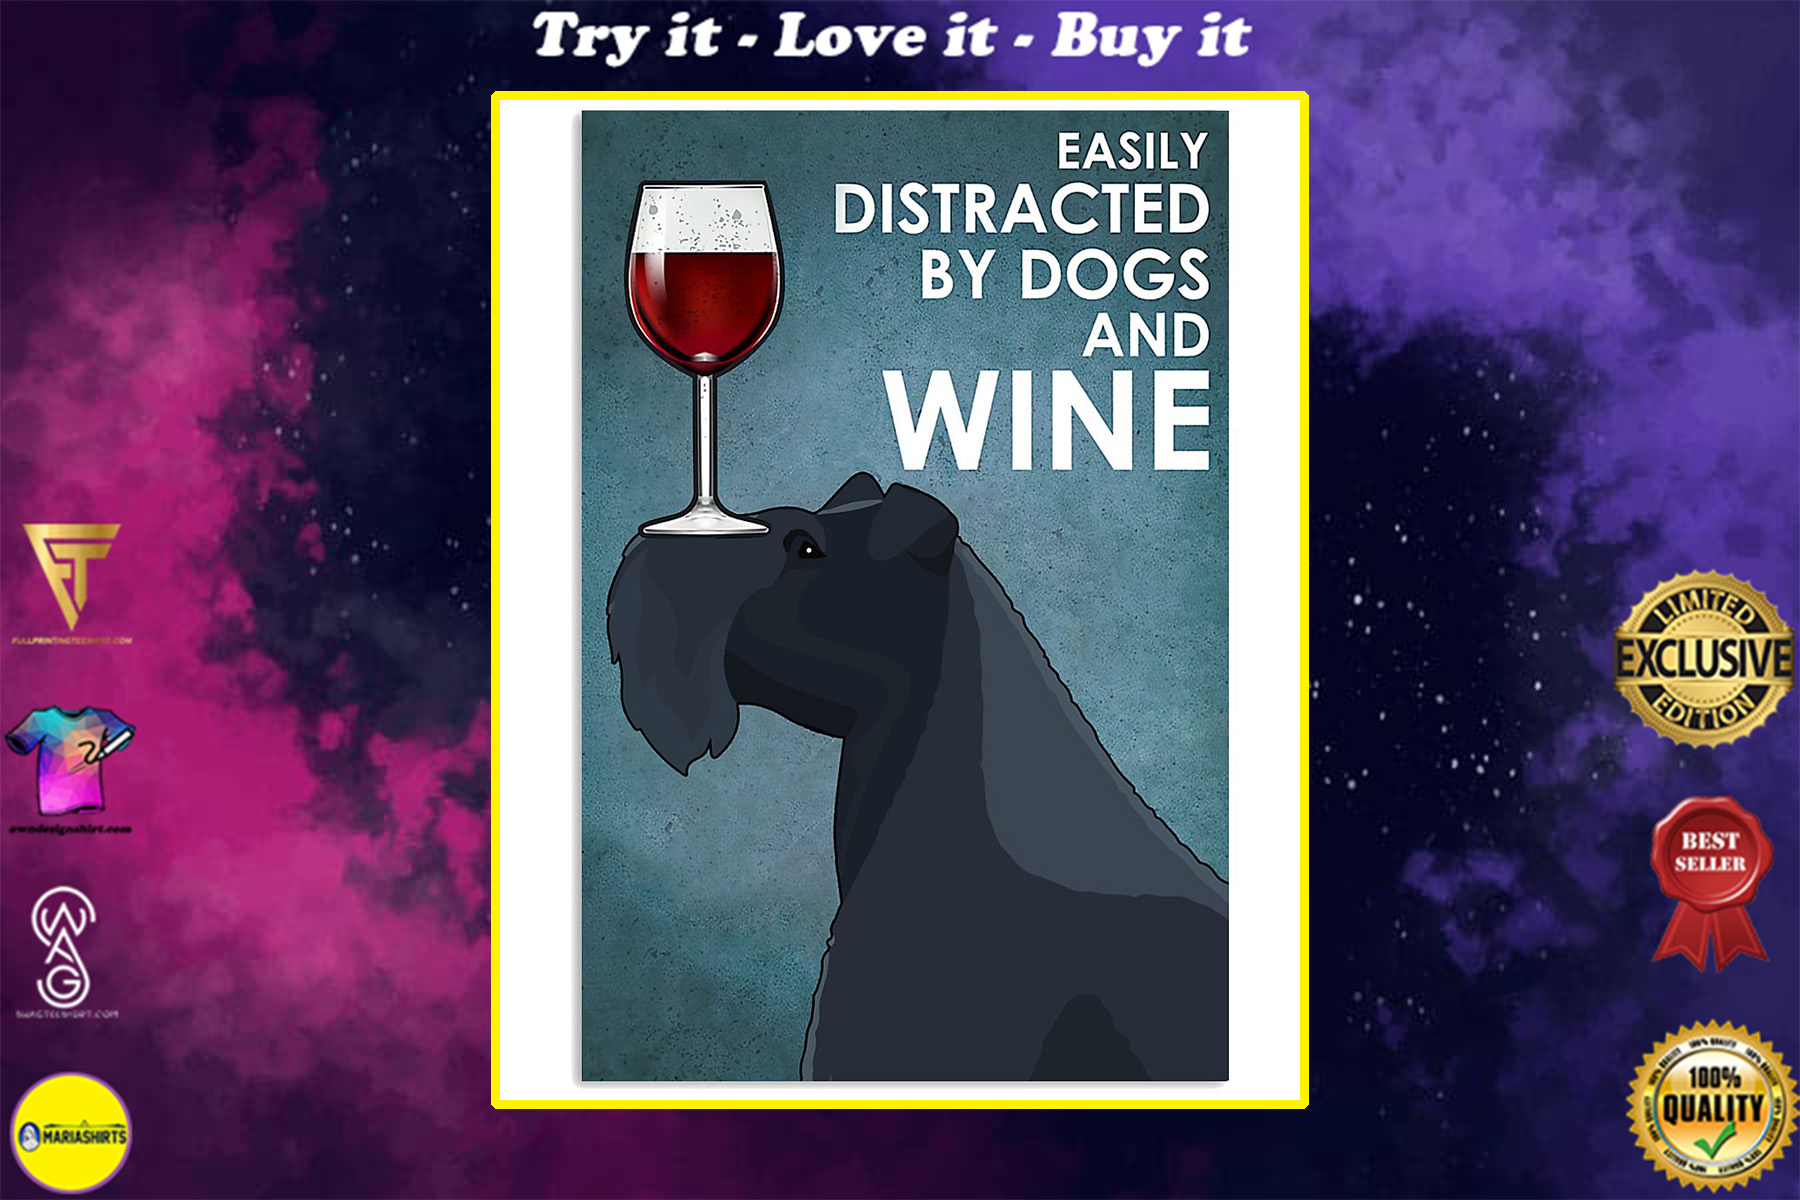 dog kerry blue terrier easily distracted by dogs and wine poster